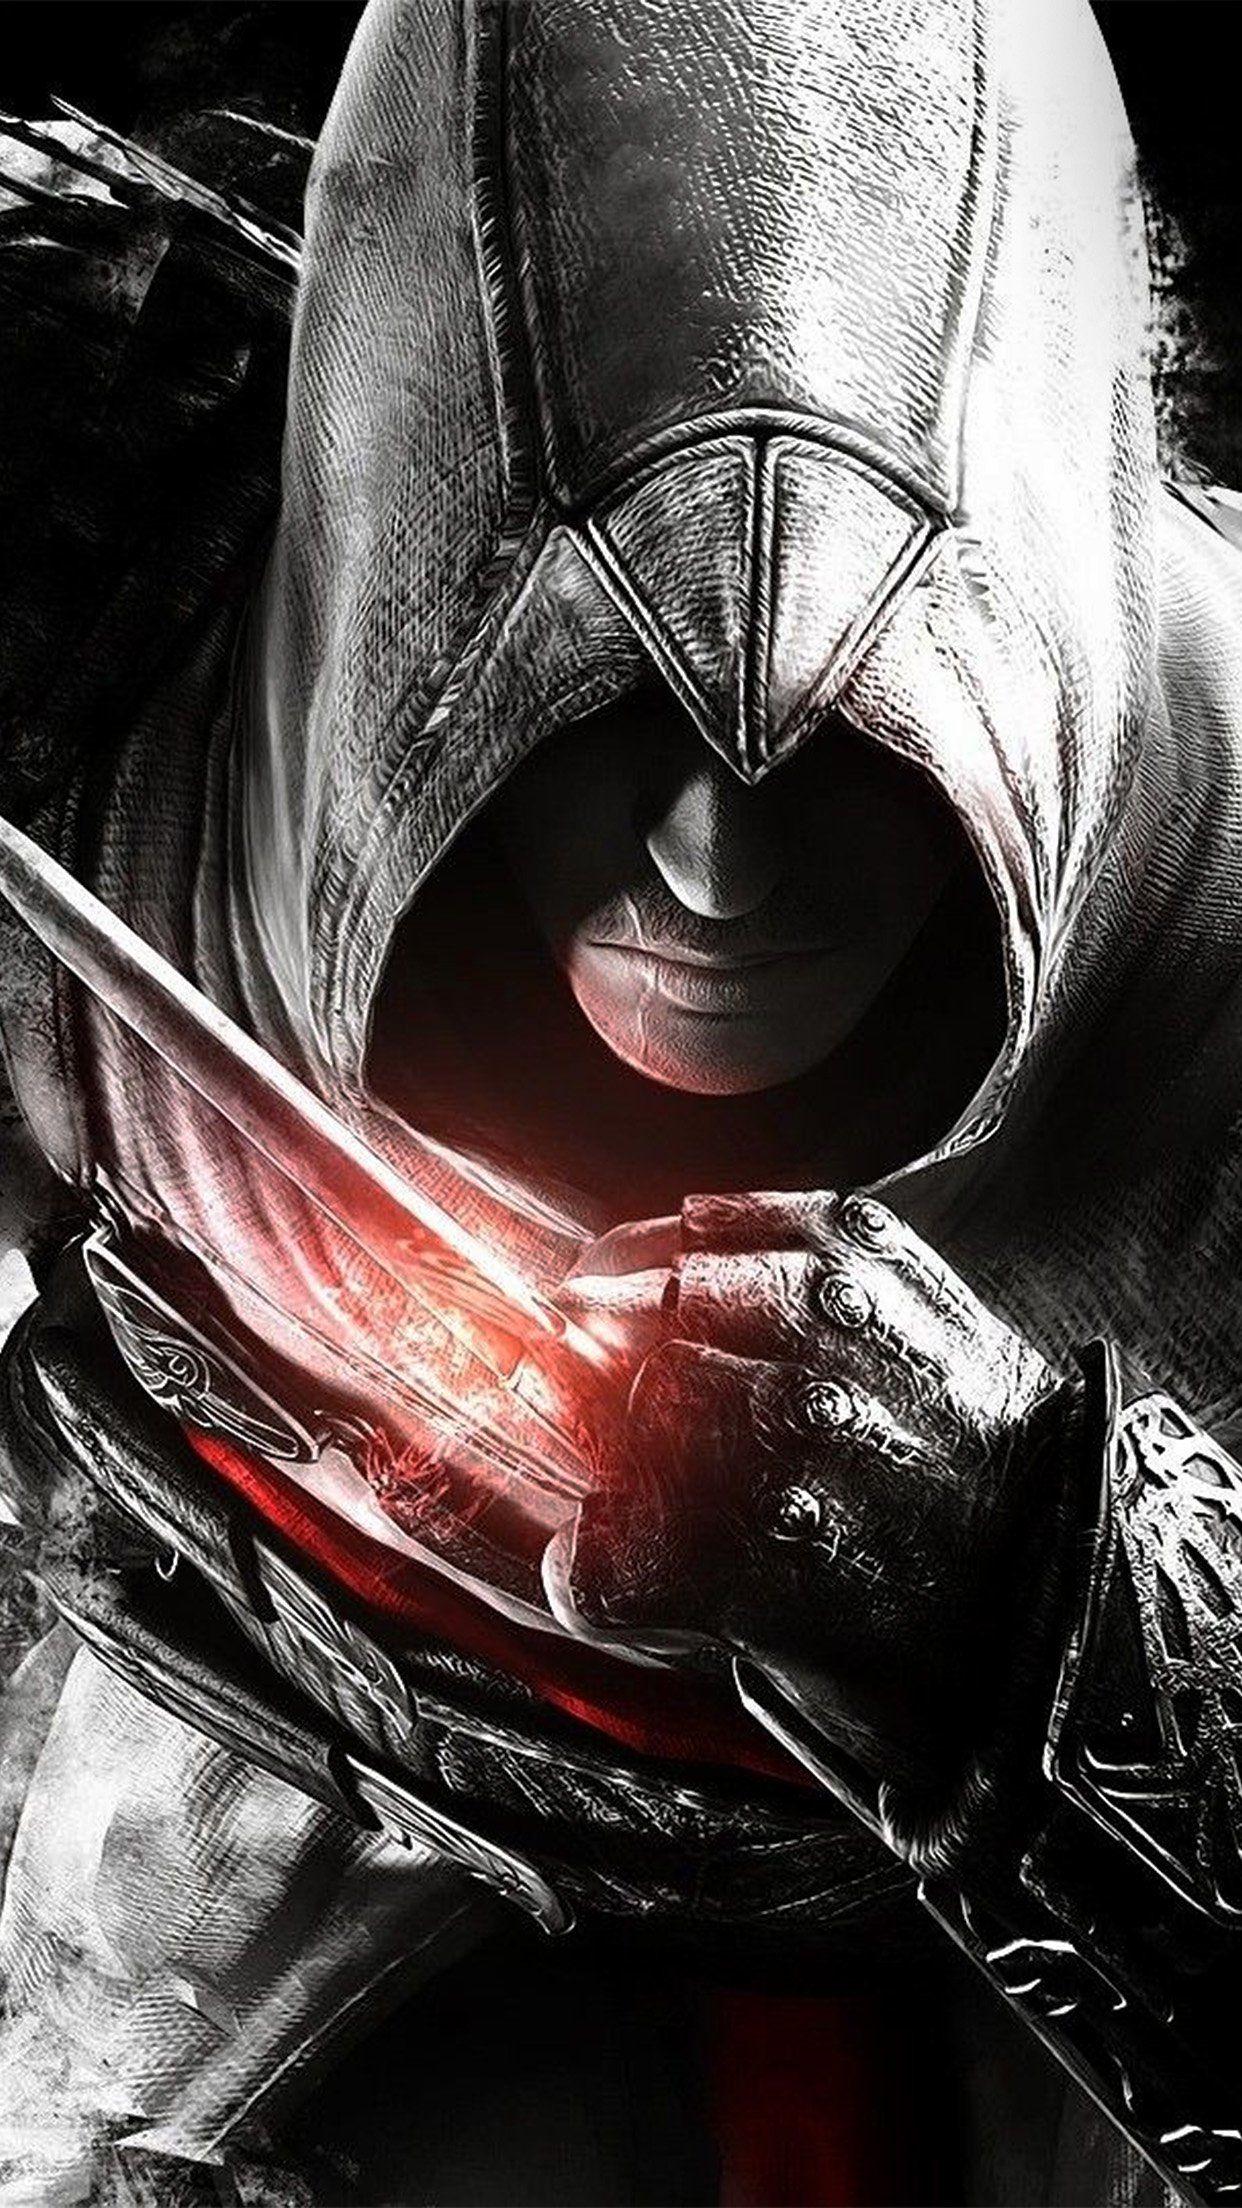 HD Assasin Creed Wallpapers For Mobile - Wallpaper Cave